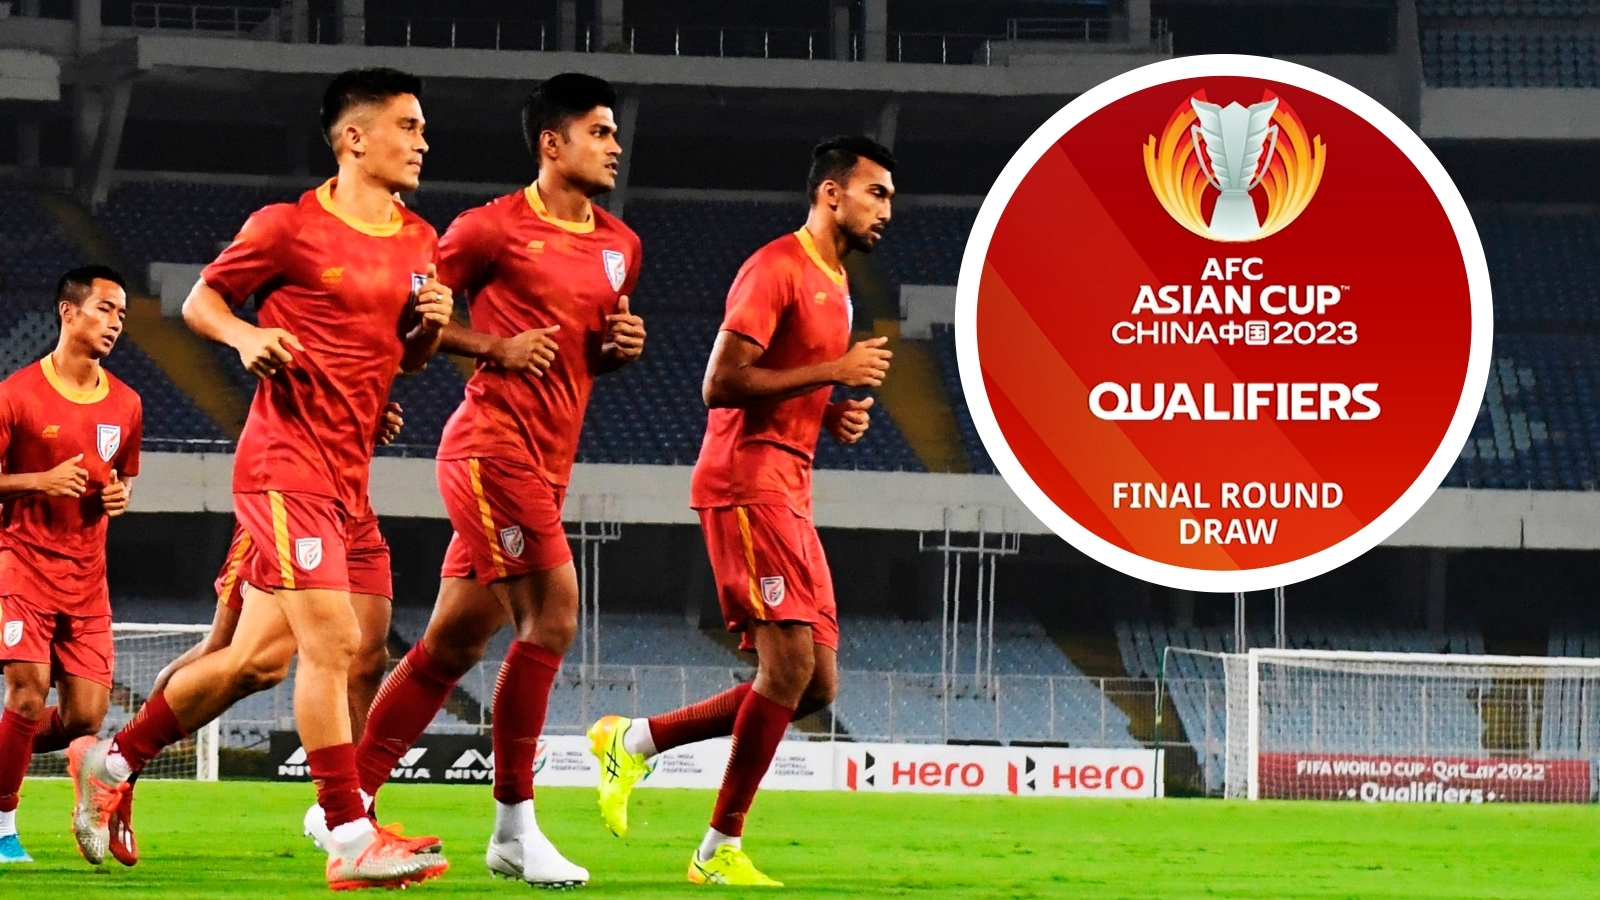 Asian cup qualifiers